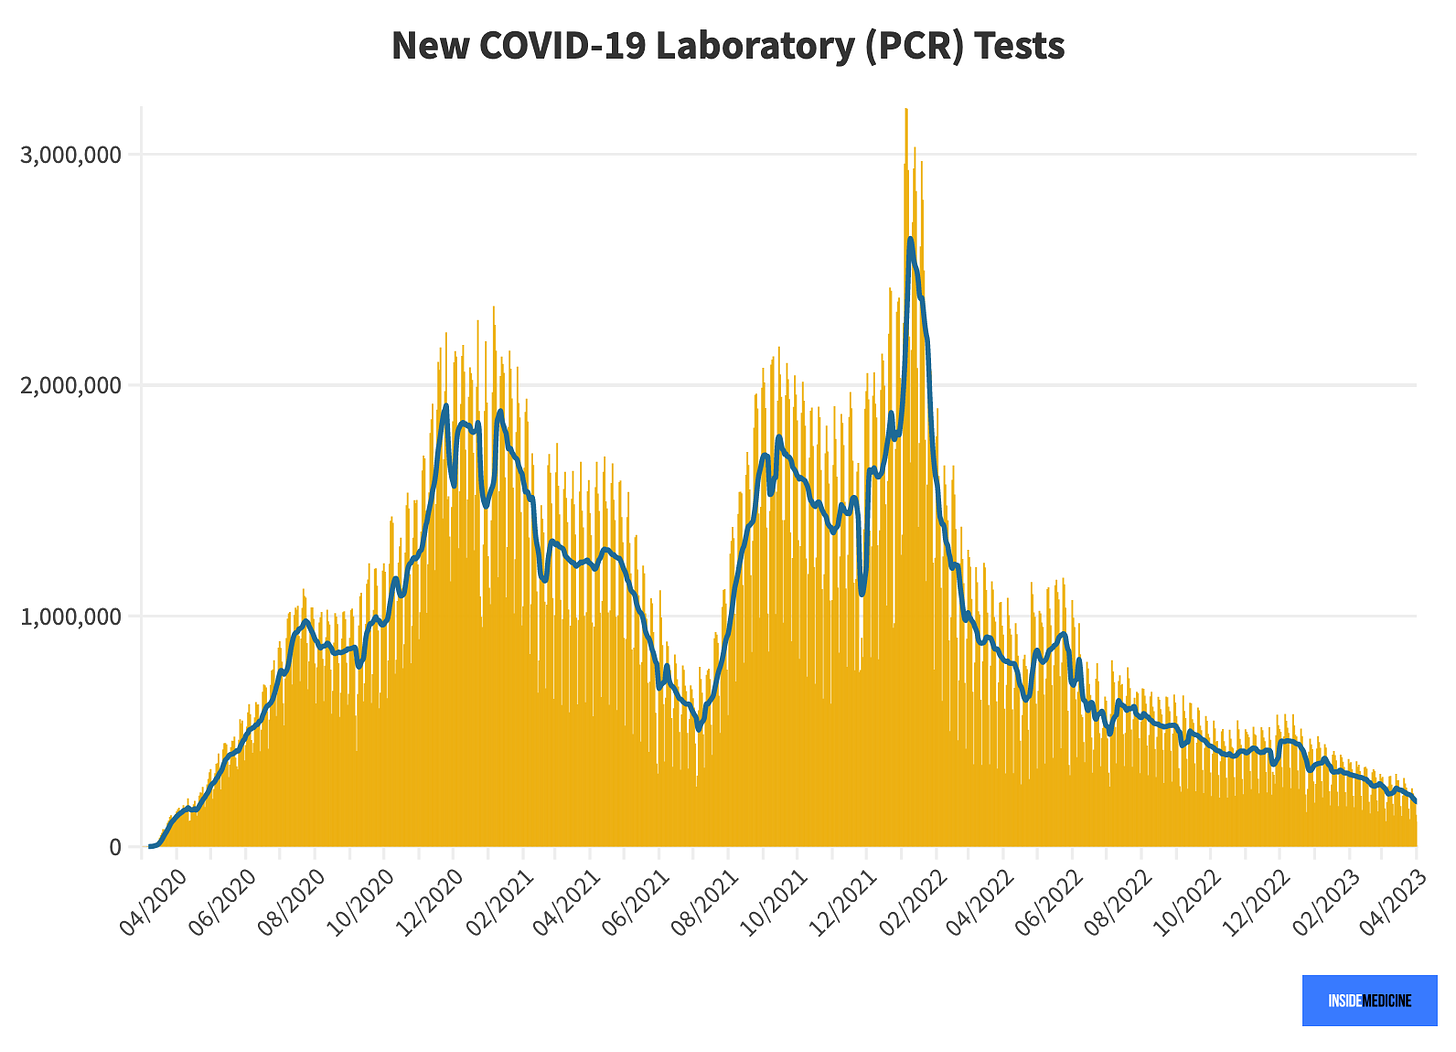 pcr tests per day, past 3 years